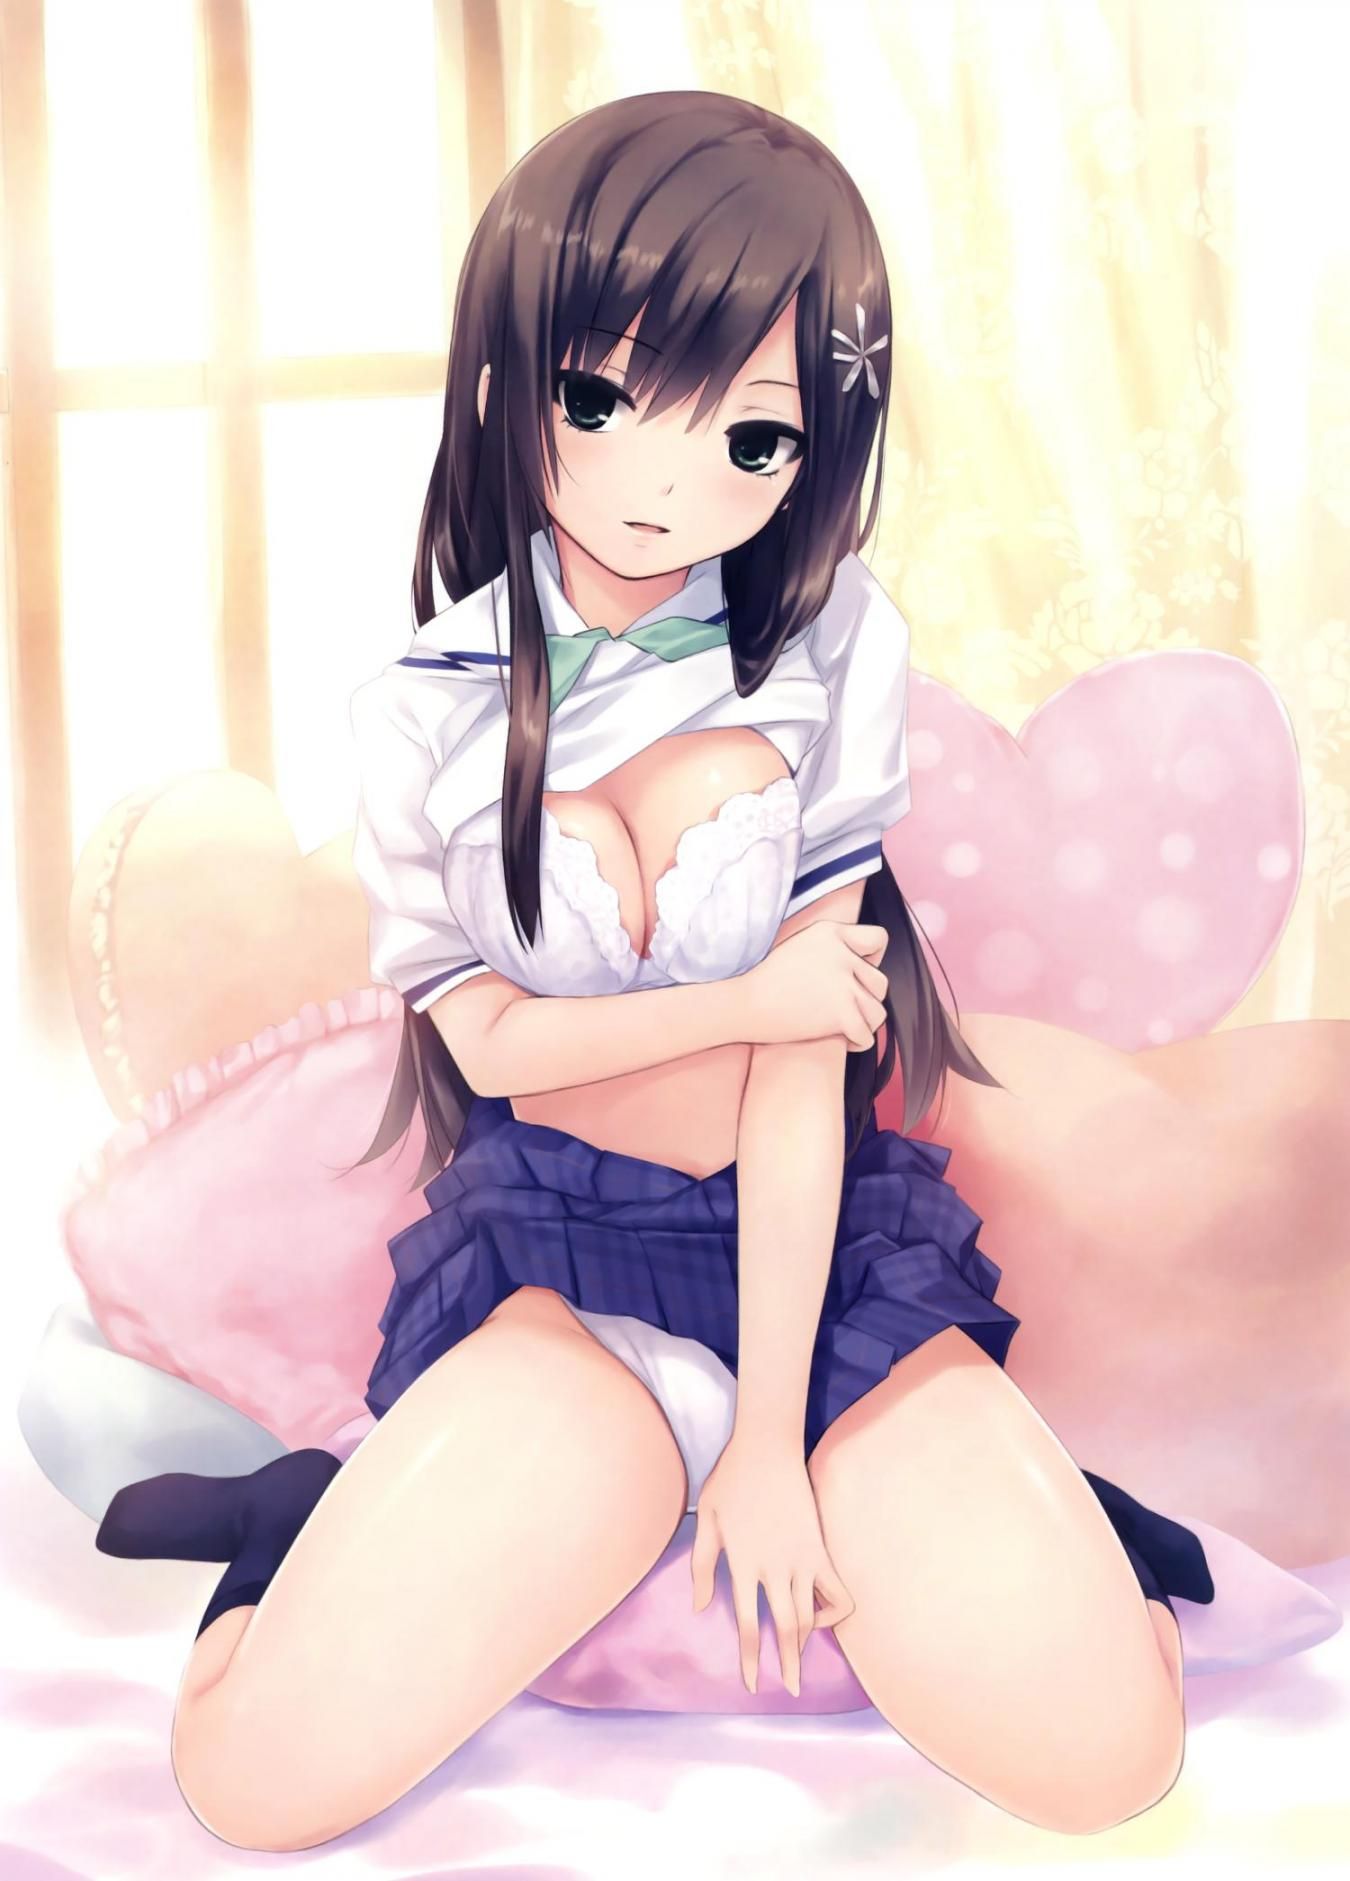 【Secondary erotic】 Here is an erotic image that makes me want to go out with and have sex with a girl in uniform 15